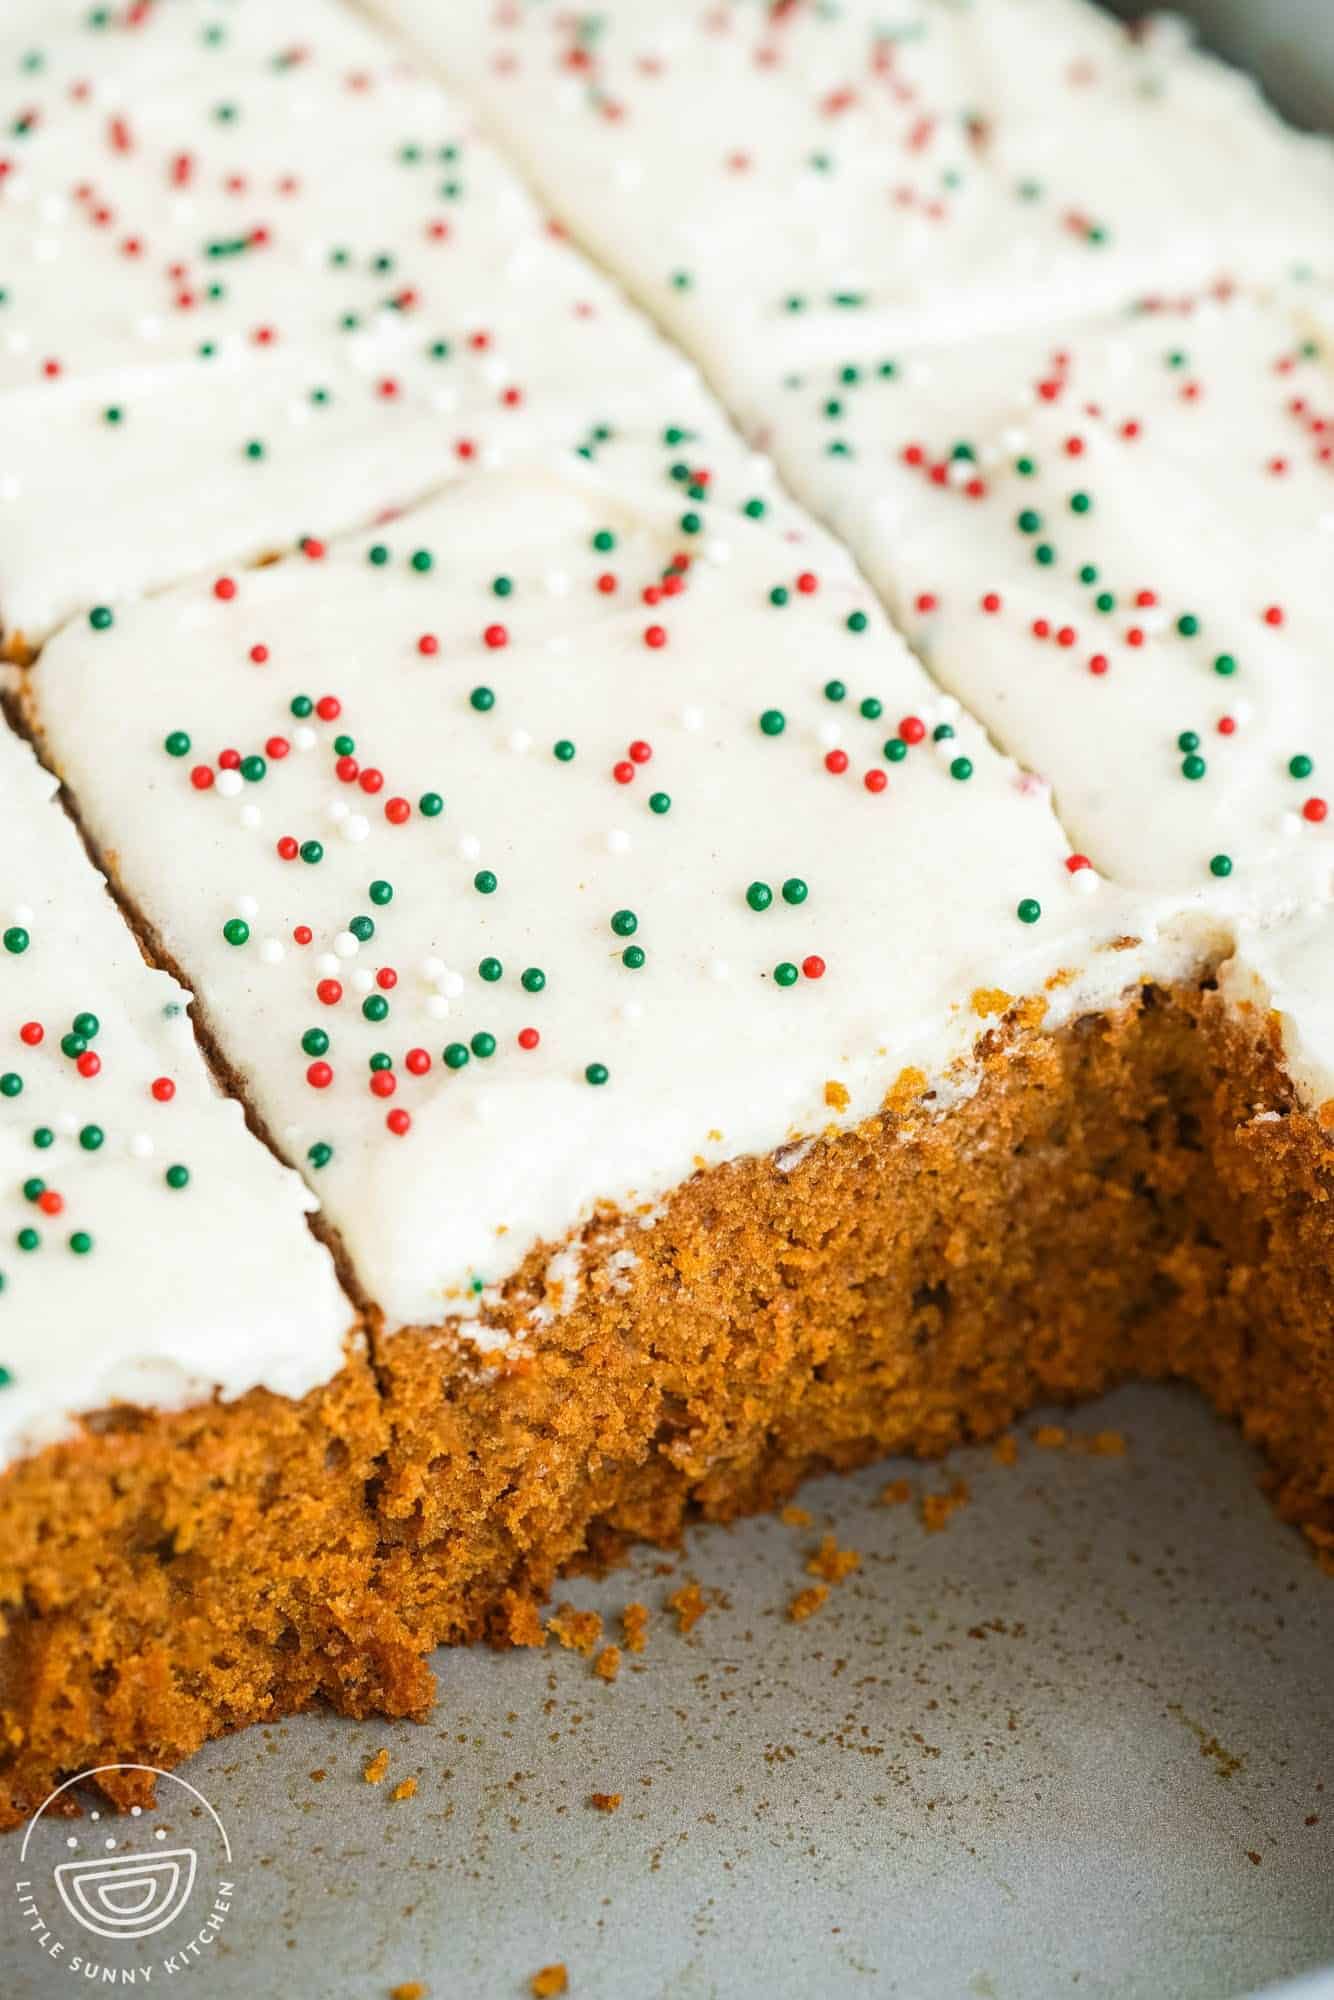 a frosted gingerbread cake with sprinkles in a metal cake pan. Two slices have been removed, and the rest of the cake is cut in squares.